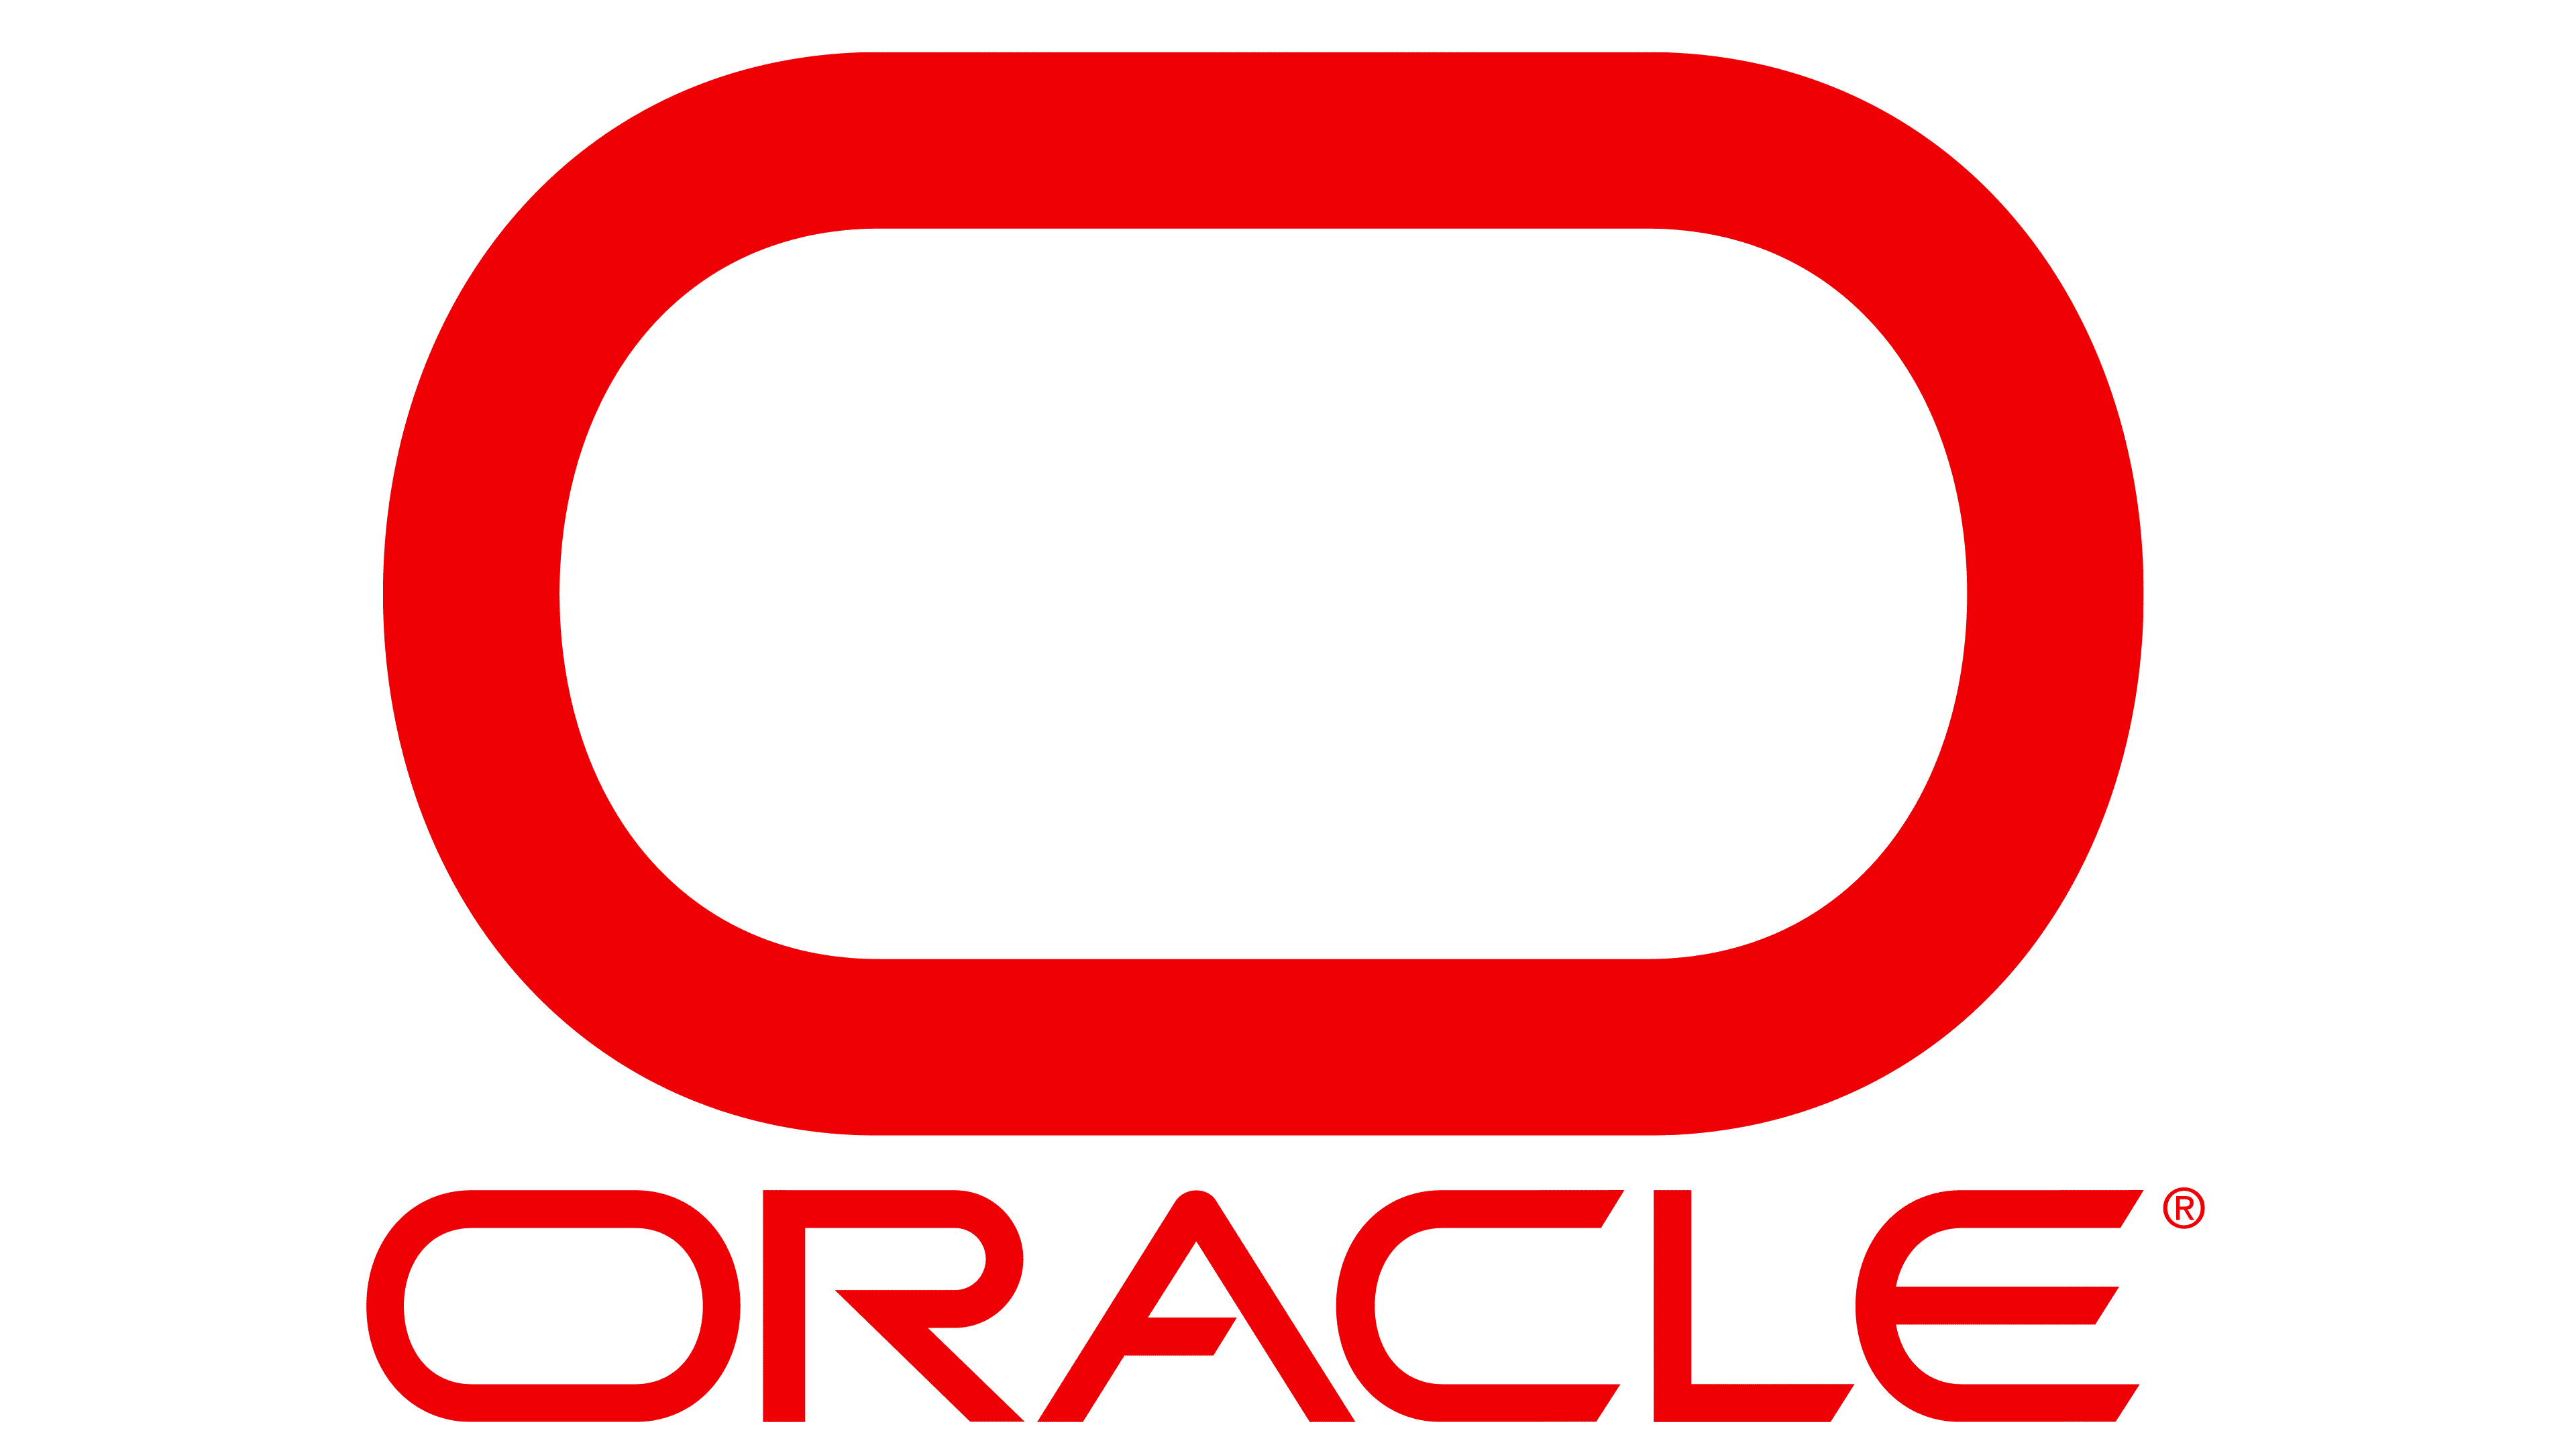 The logo for Oracle.